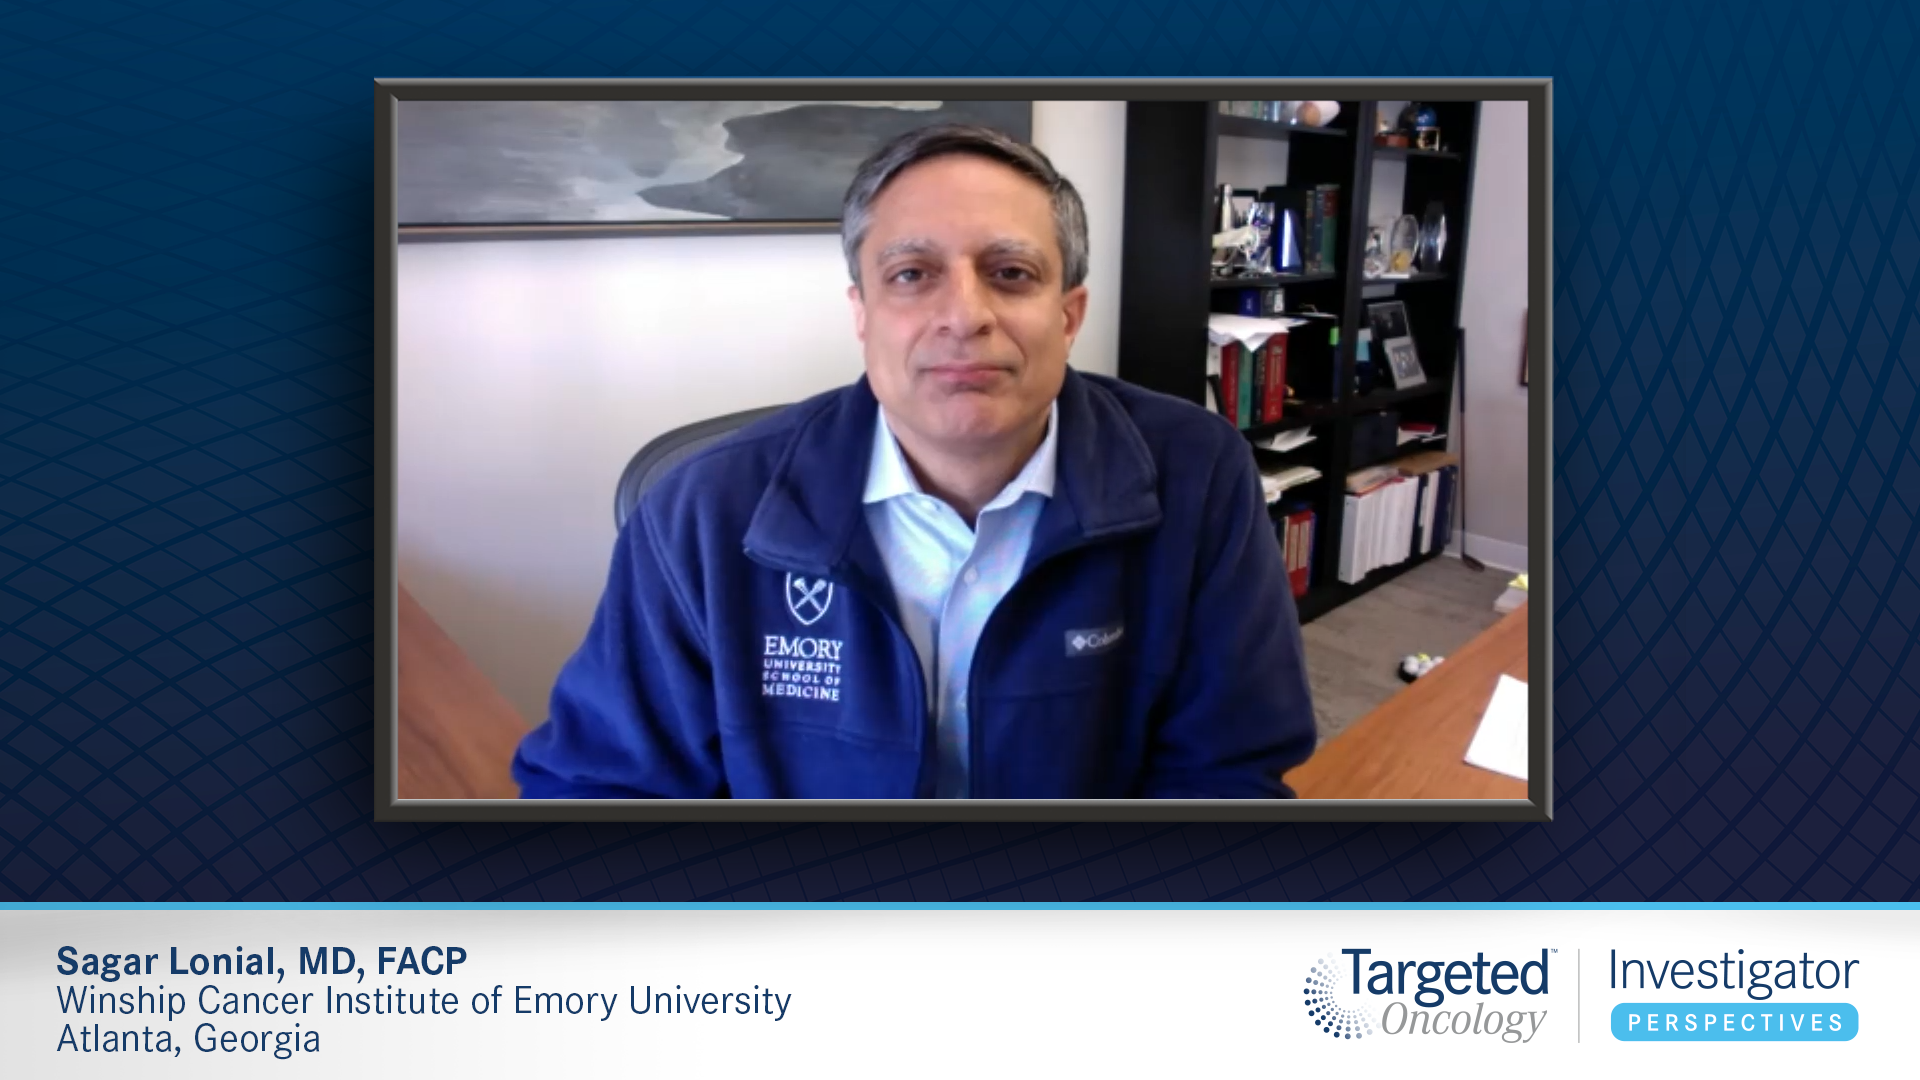 BCMA-Targeting Agents for Heavily Pretreated MM